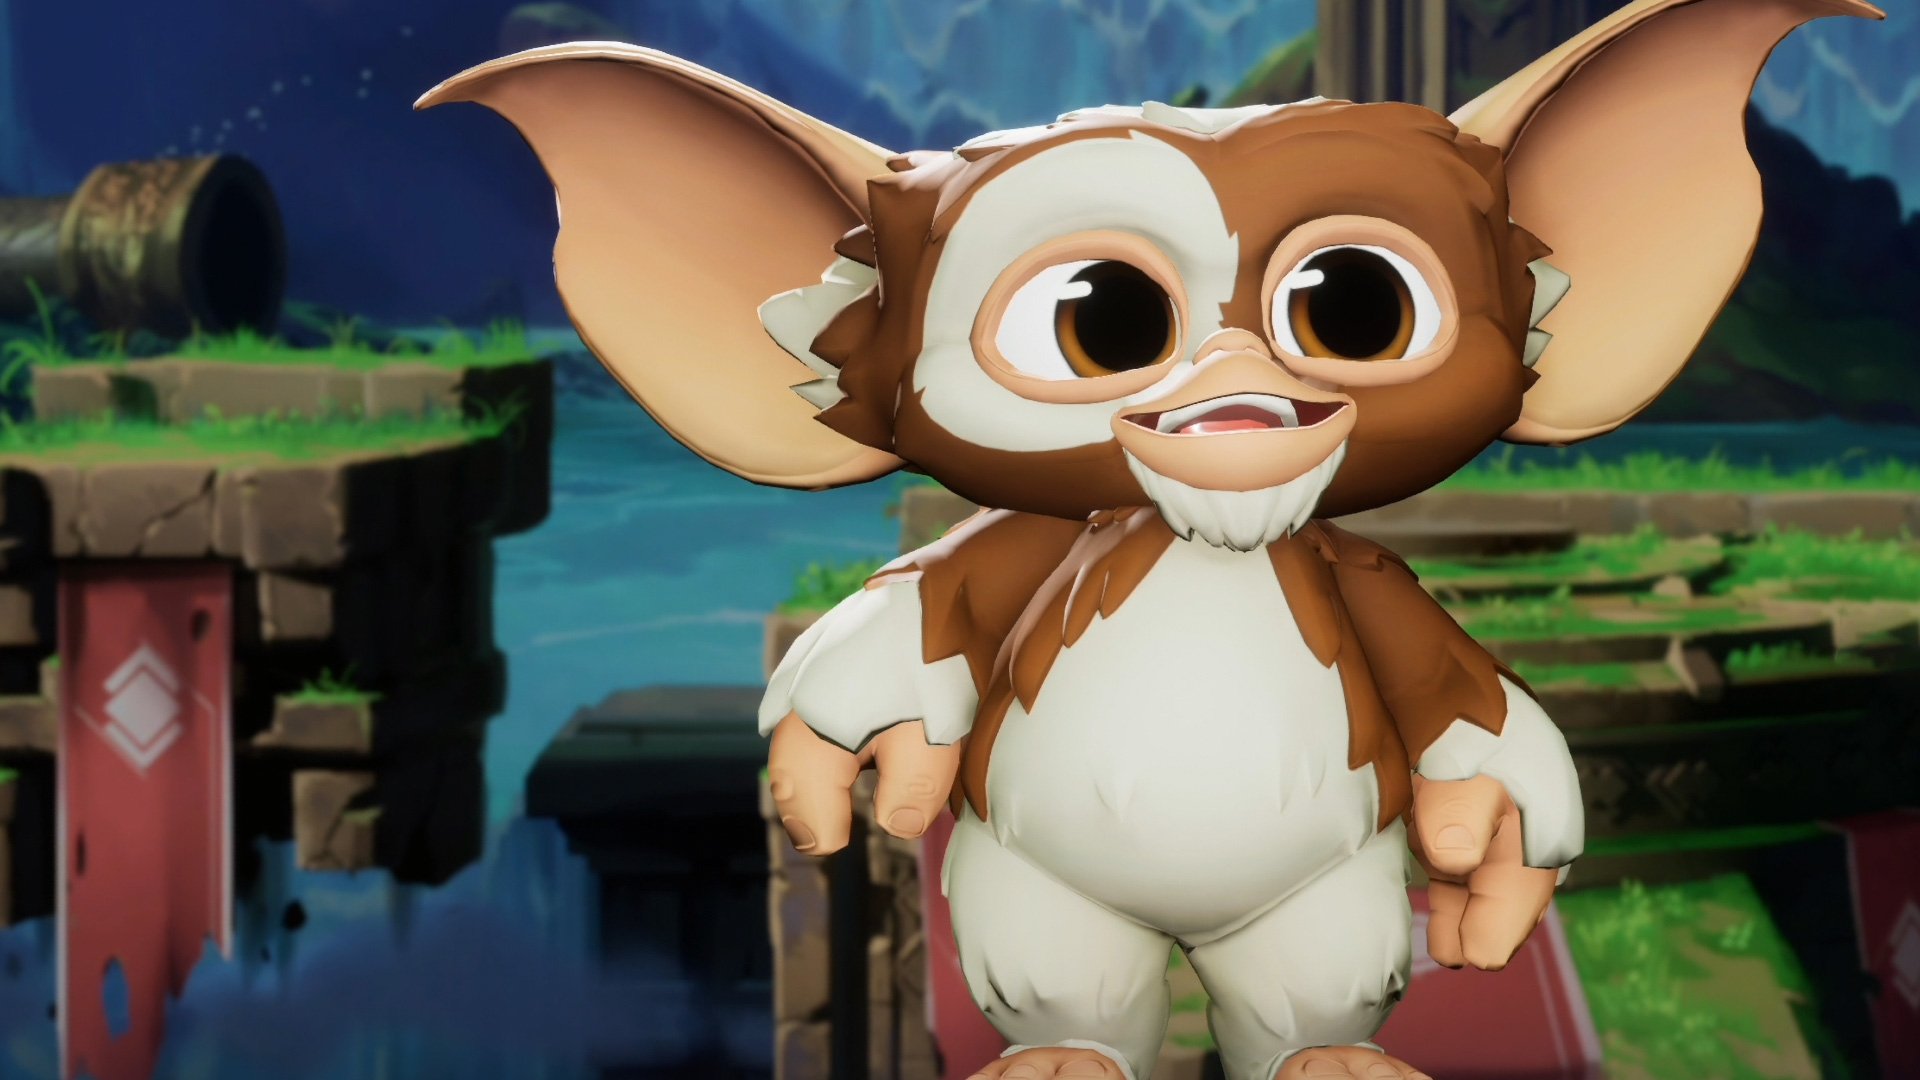 MultiVersus Adds Gizmo from 'Gremlins' as New Playable Character